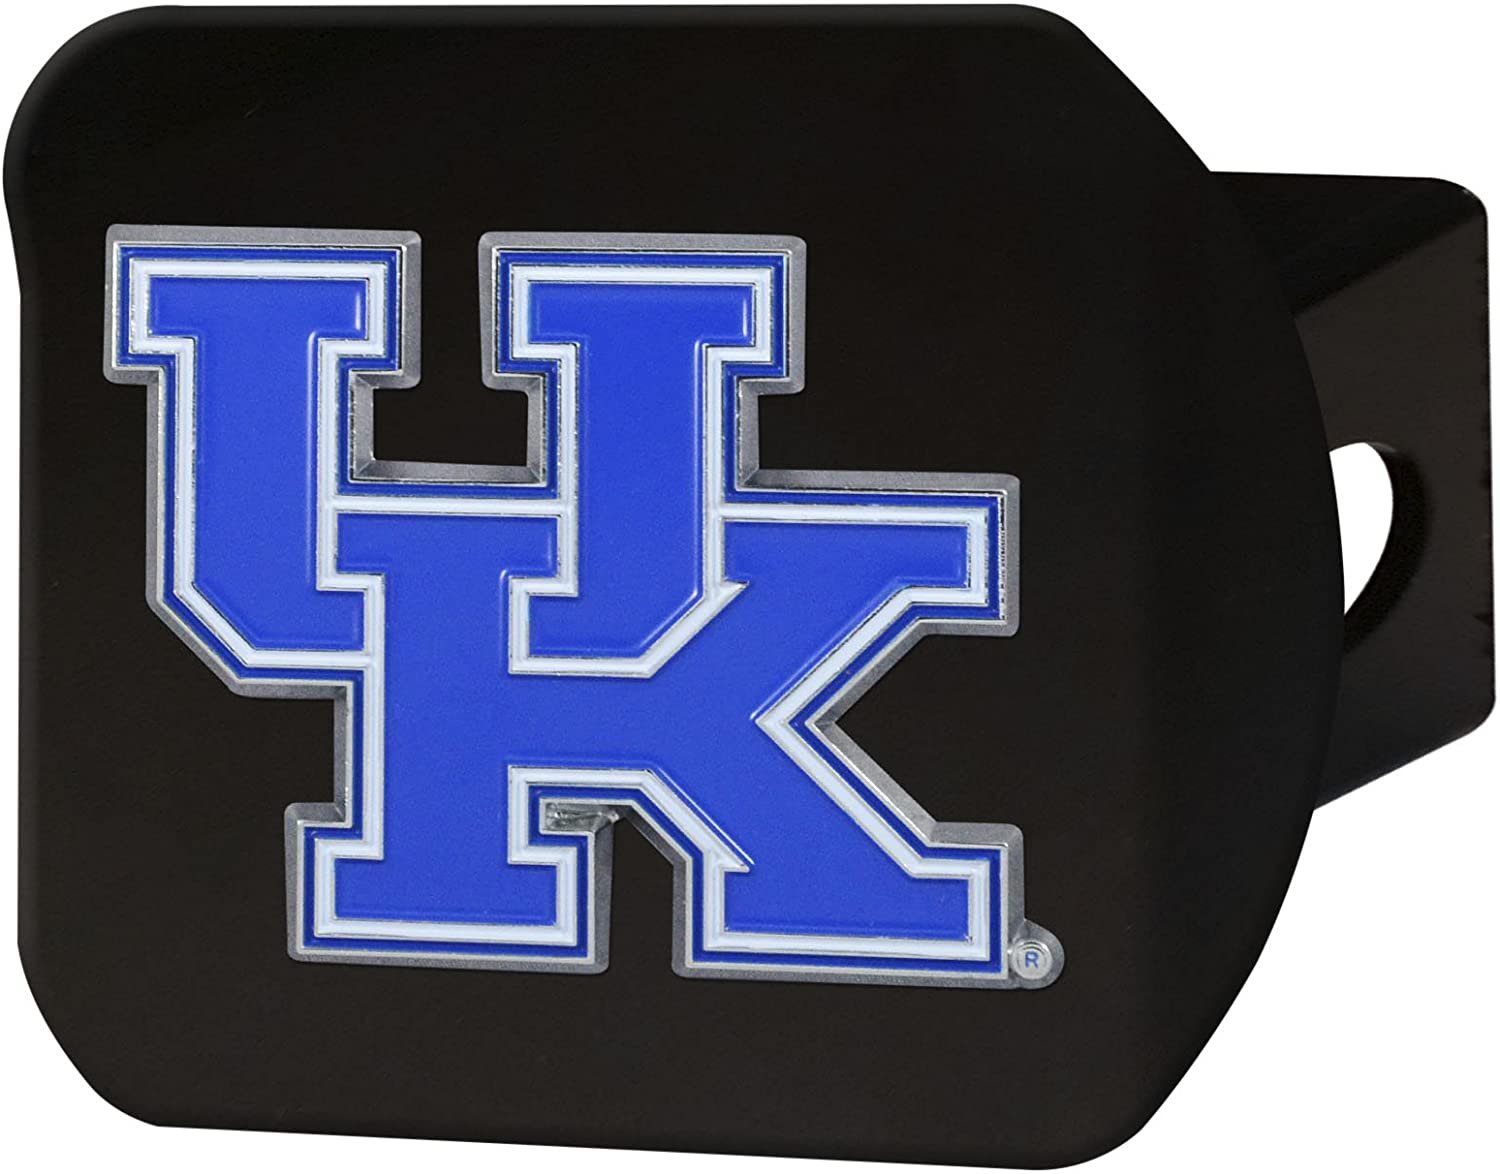 Kentucky Wildcats Solid Metal Black Hitch Cover with Color Metal Emblem 2 Inch Square Type III University of